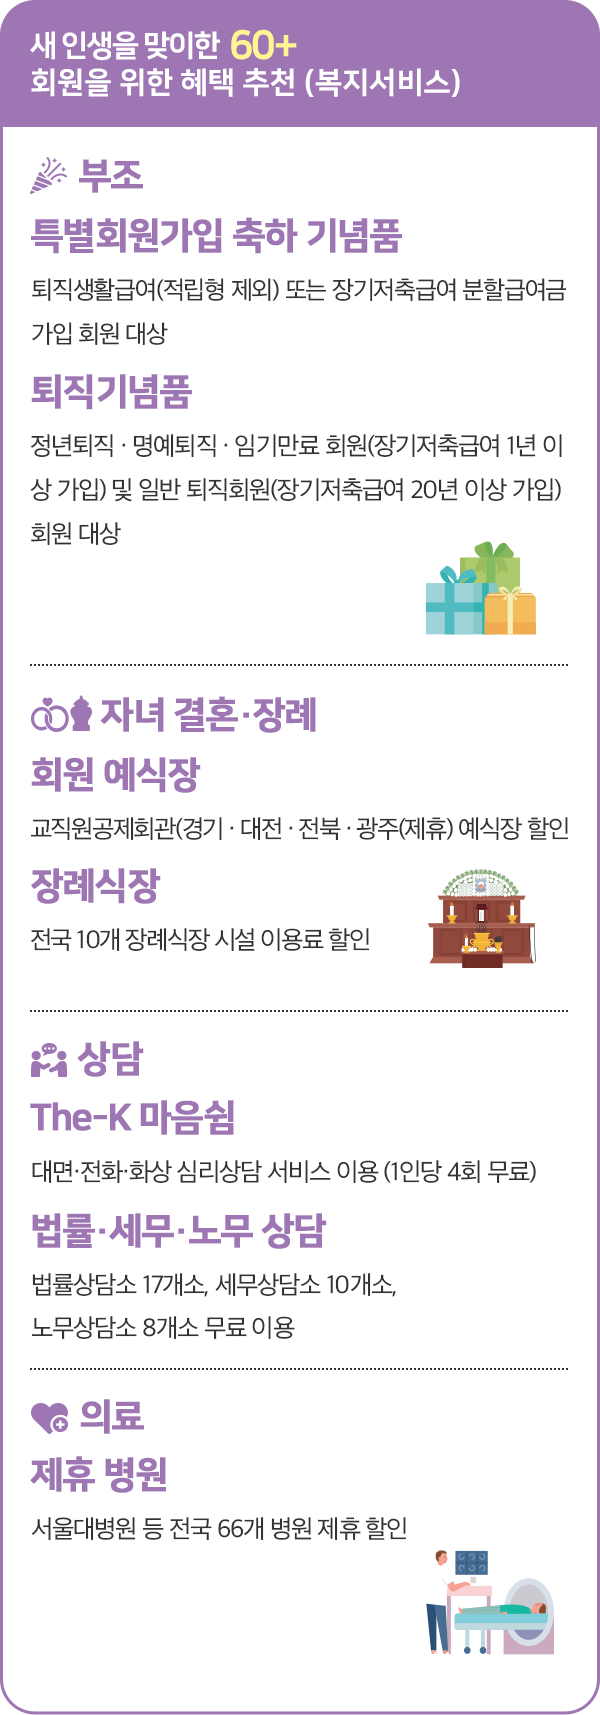 The-K 포커스 2_07